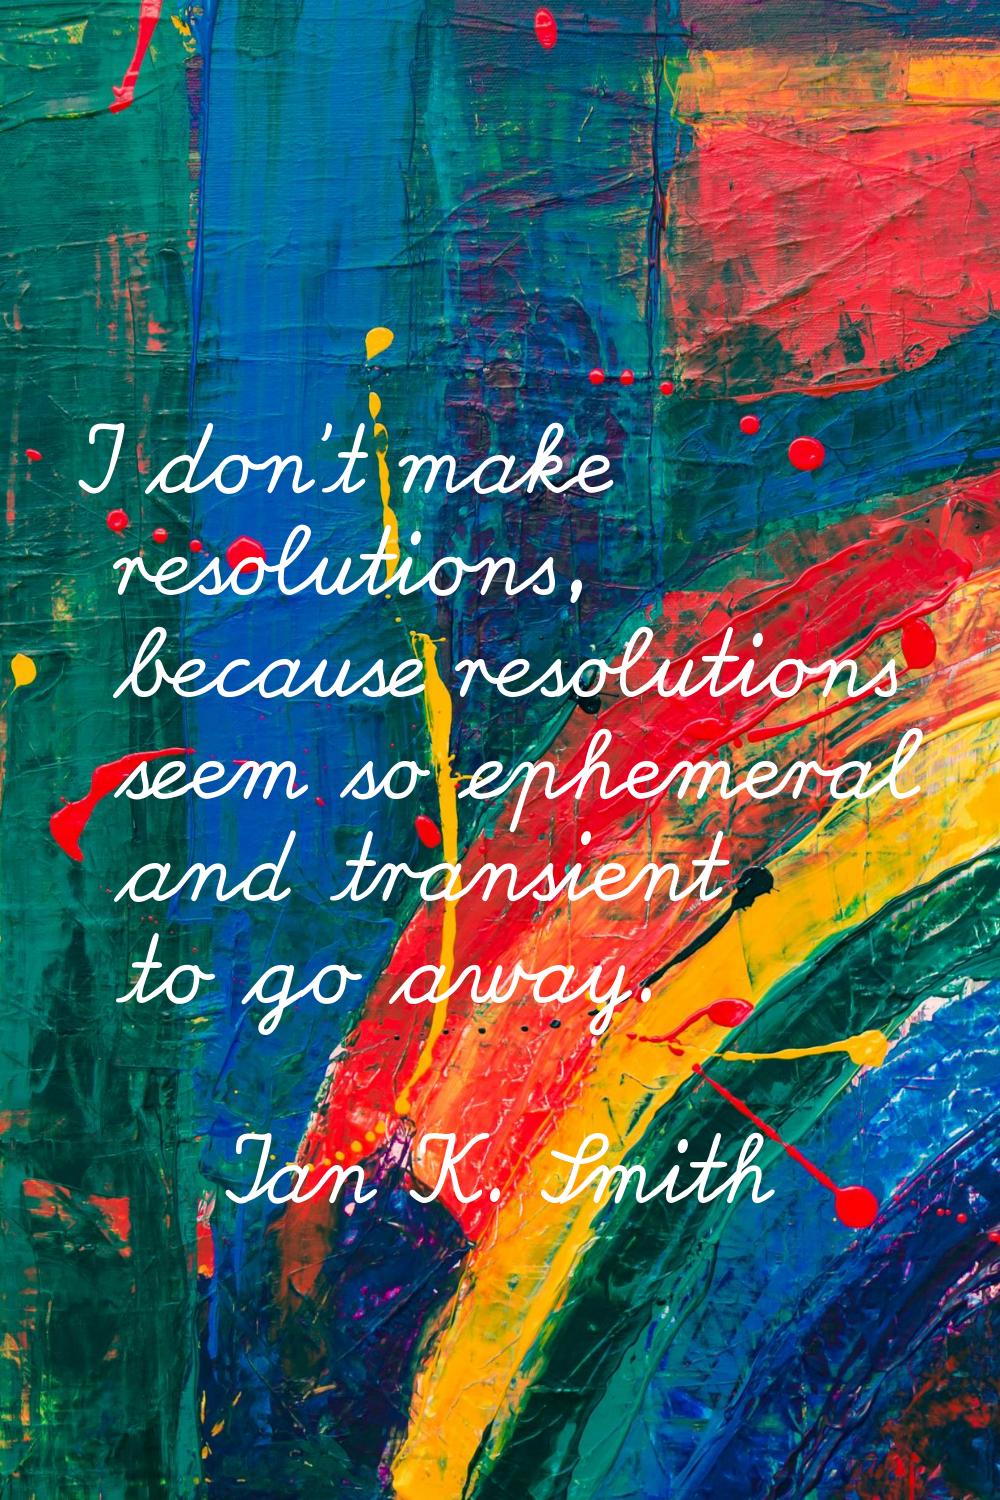 I don't make resolutions, because resolutions seem so ephemeral and transient to go away.